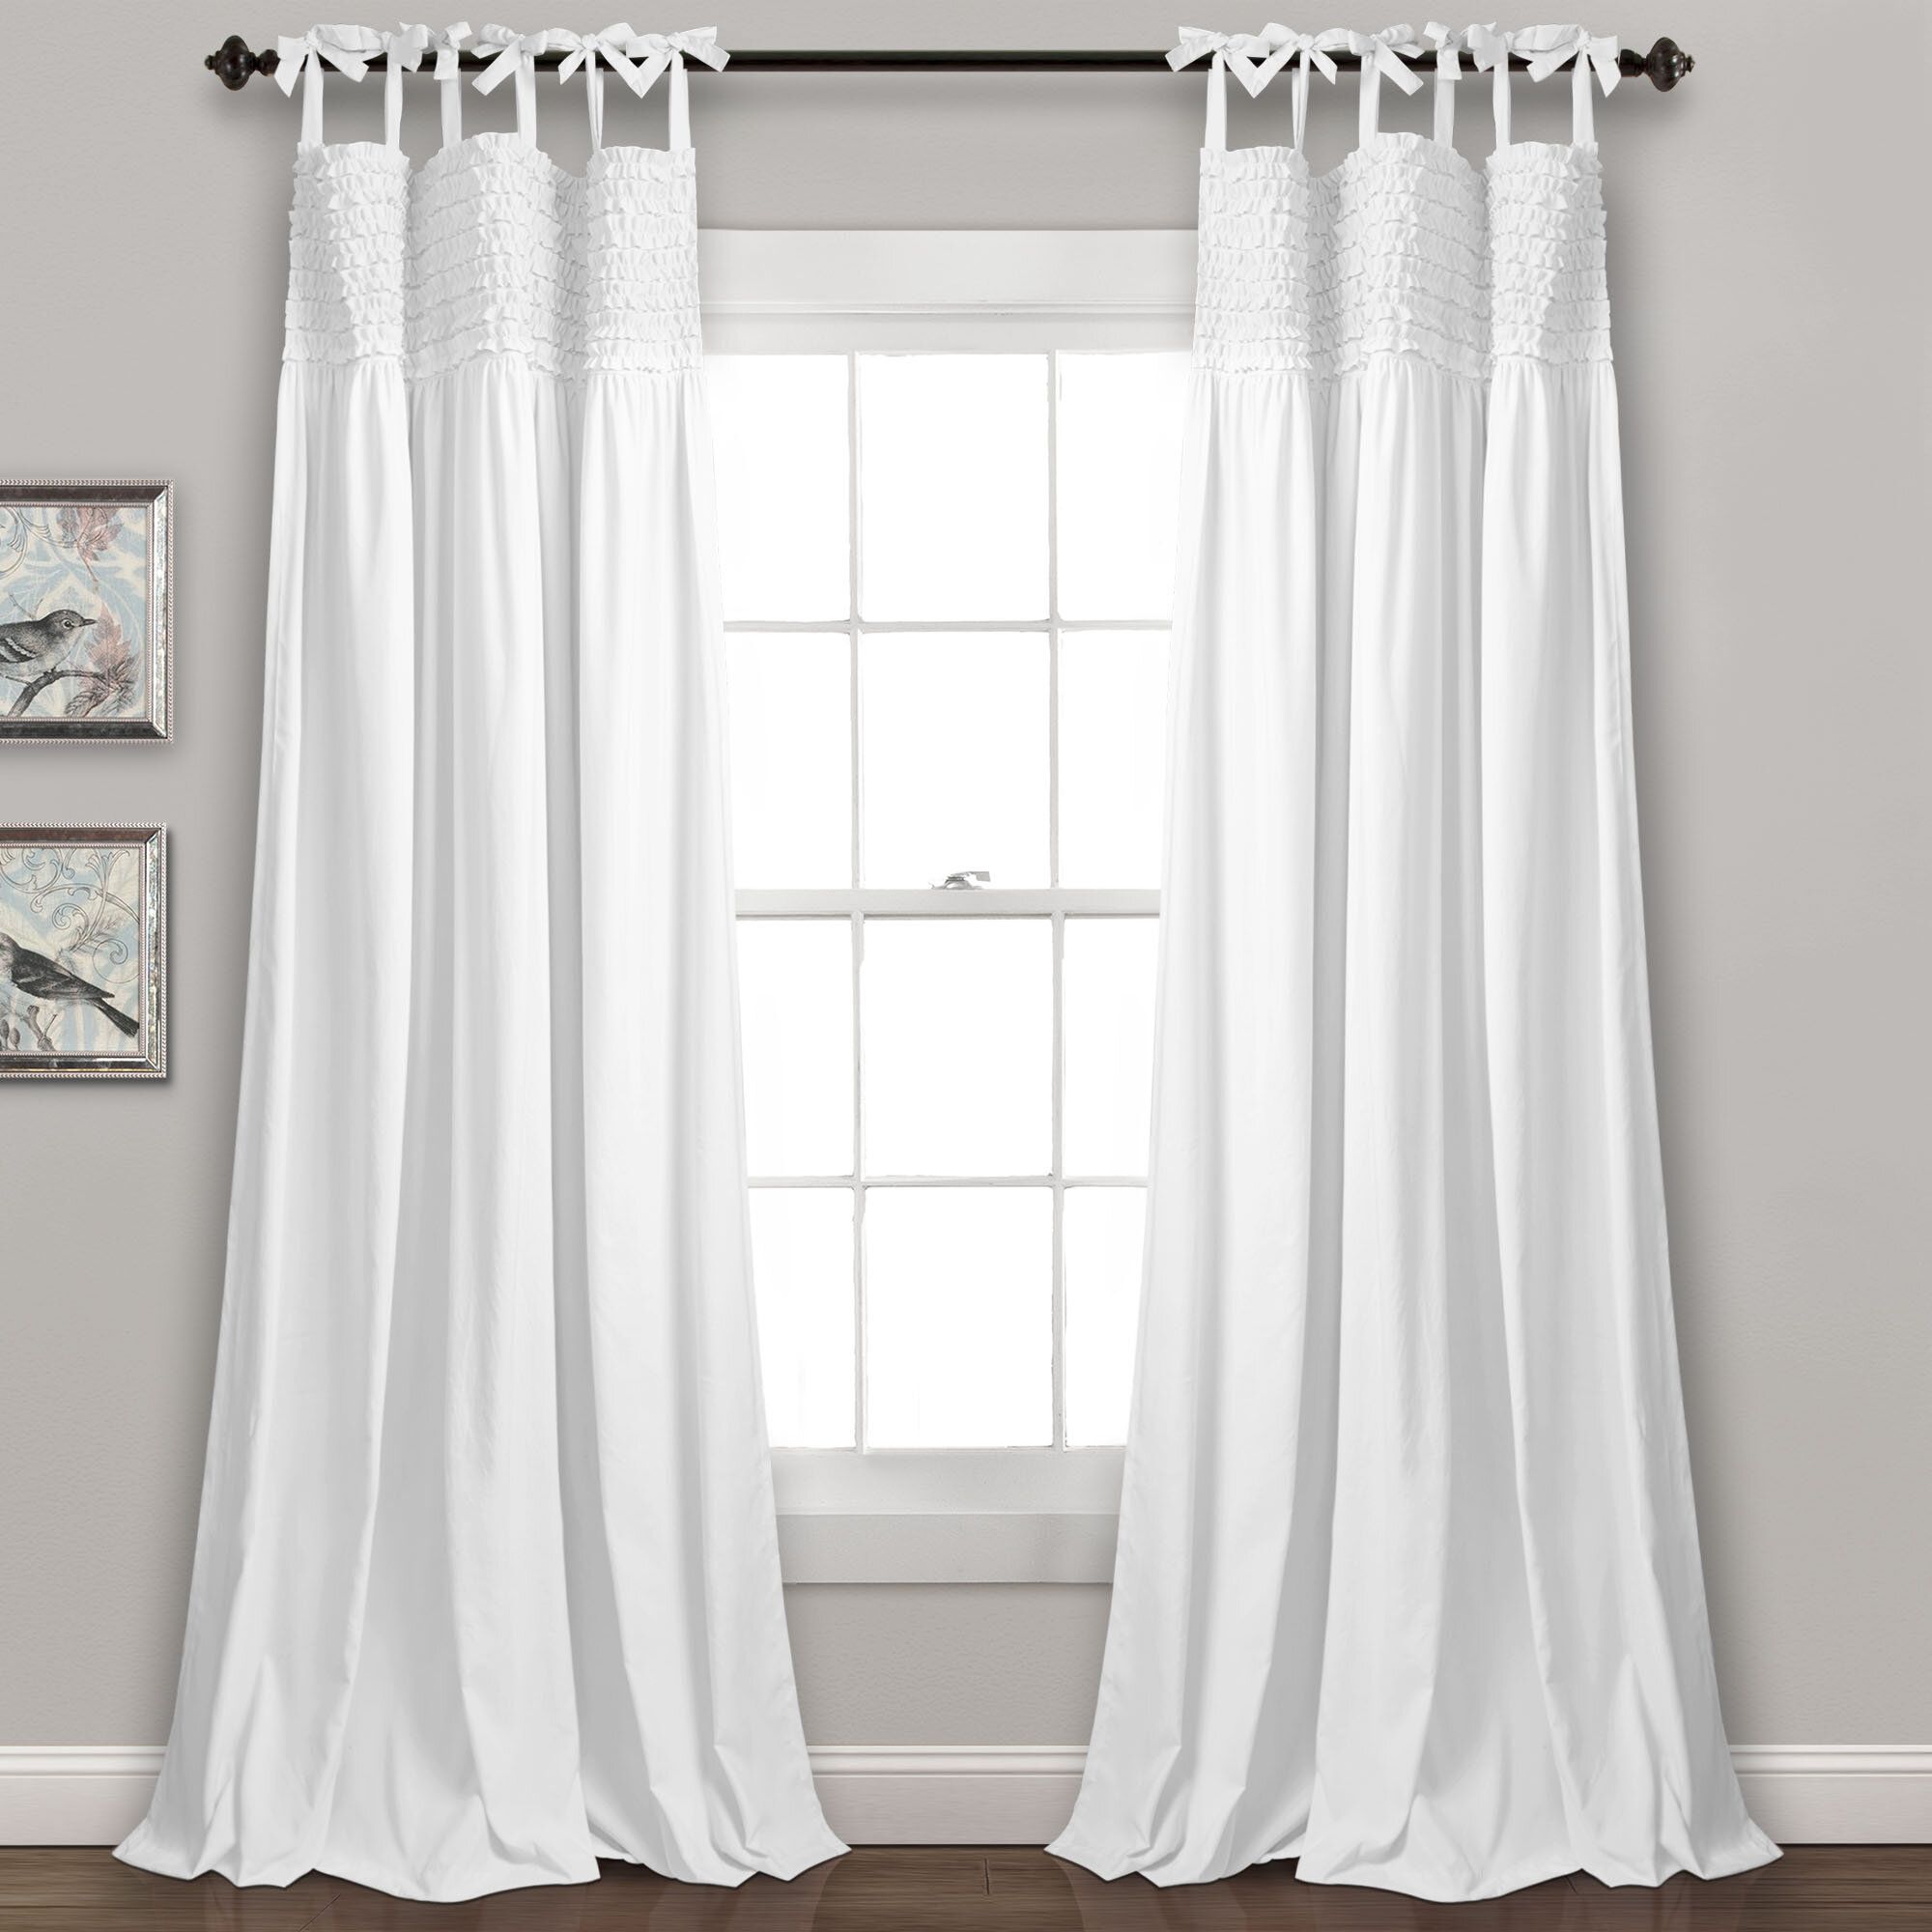 Edvin Ruffle Solid Semi Sheer Tie Top Window Panels Inside Marine Life Motif Knitted Lace Window Curtain Pieces (View 11 of 20)